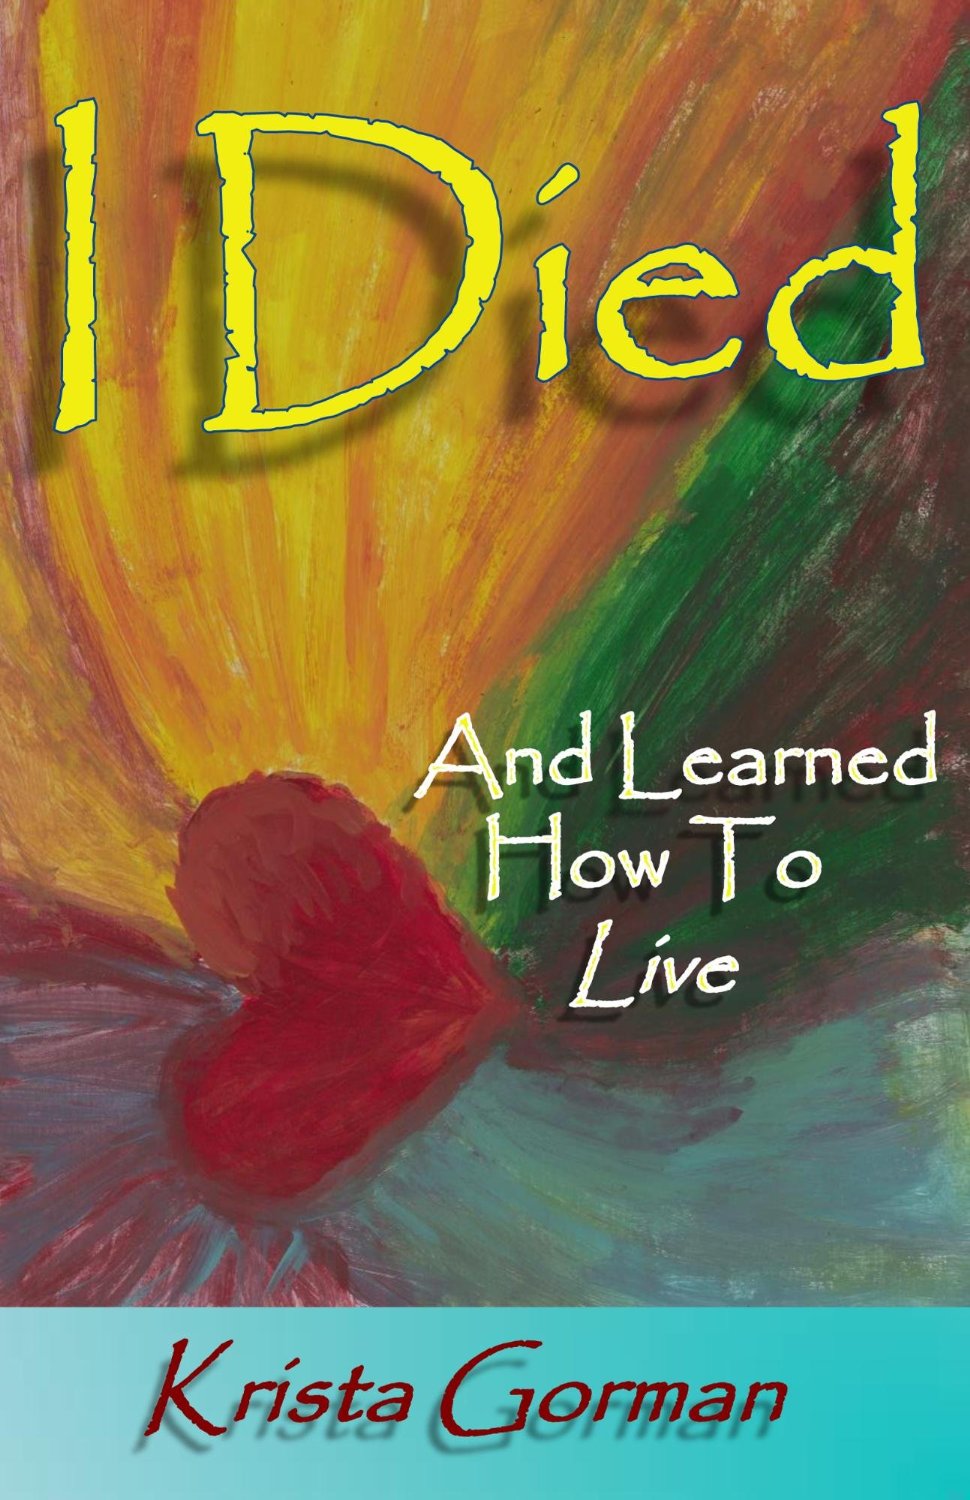 I Died And Learned How To Live by Krista Gorman